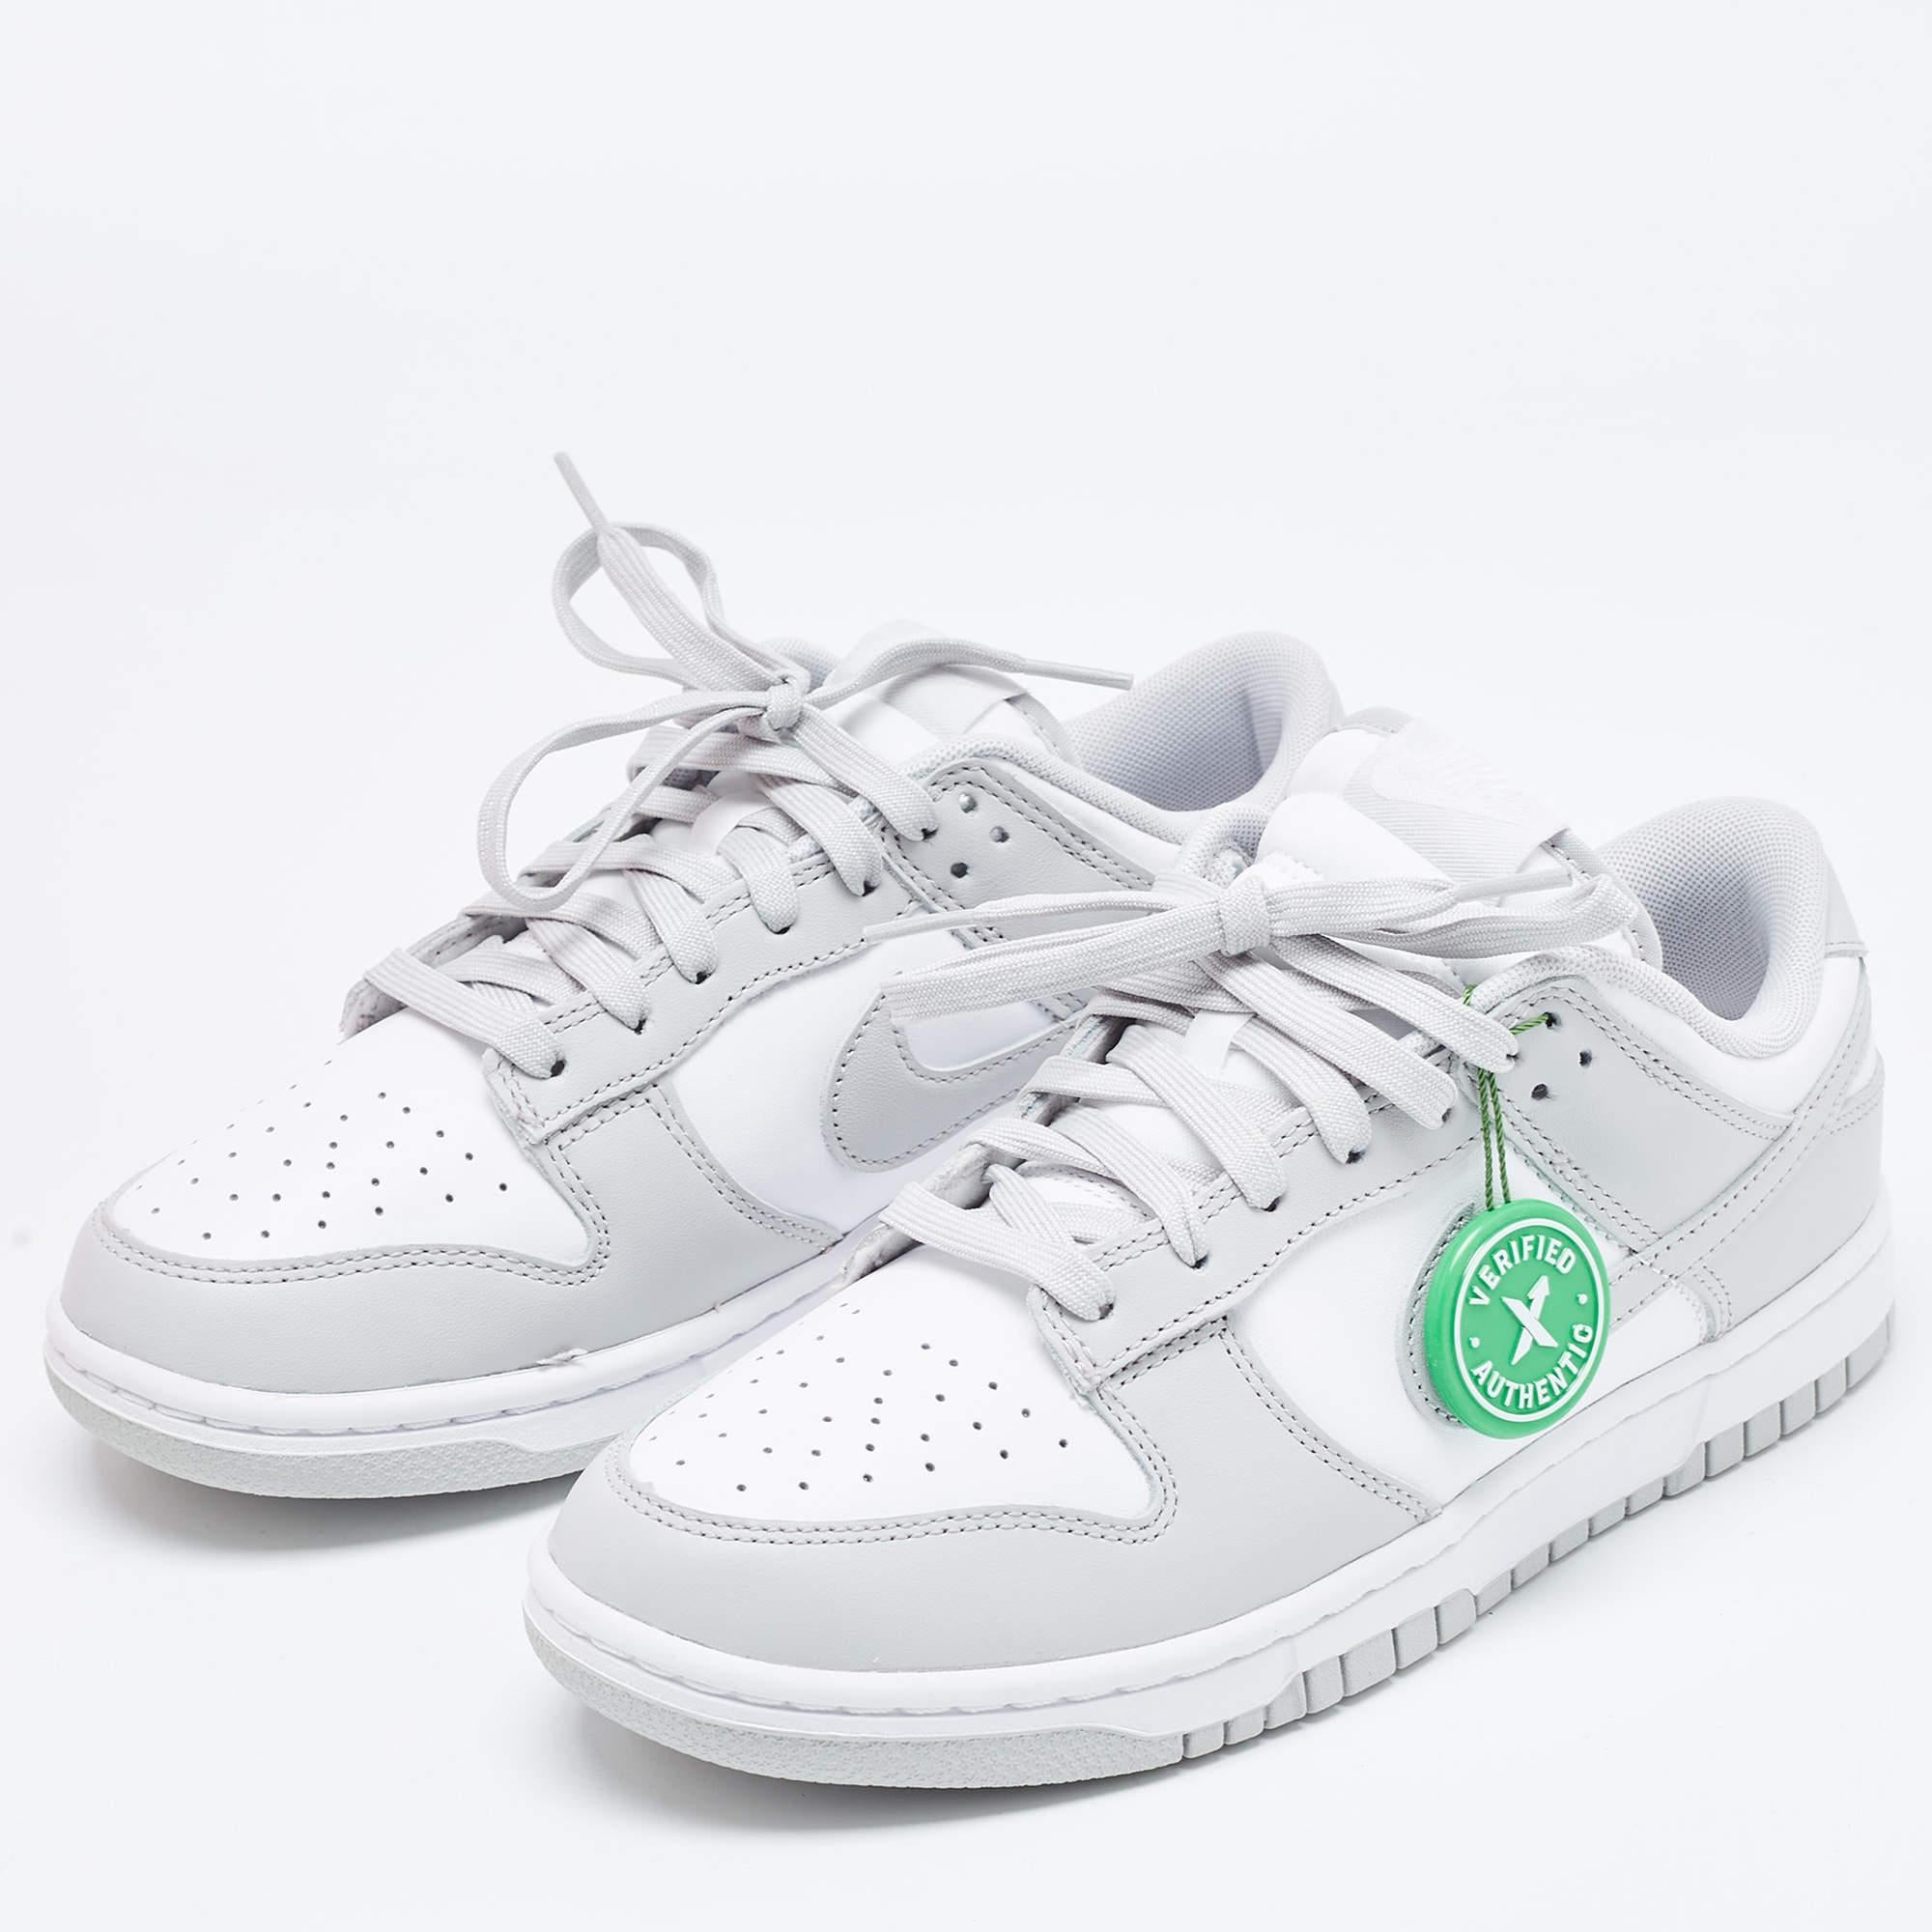 Coming in a classic silhouette, these designer sneakers are a seamless combination of luxury, comfort, and style. These sneakers are finished with signature details and comfortable insoles.

Includes: Original Box, Invoice